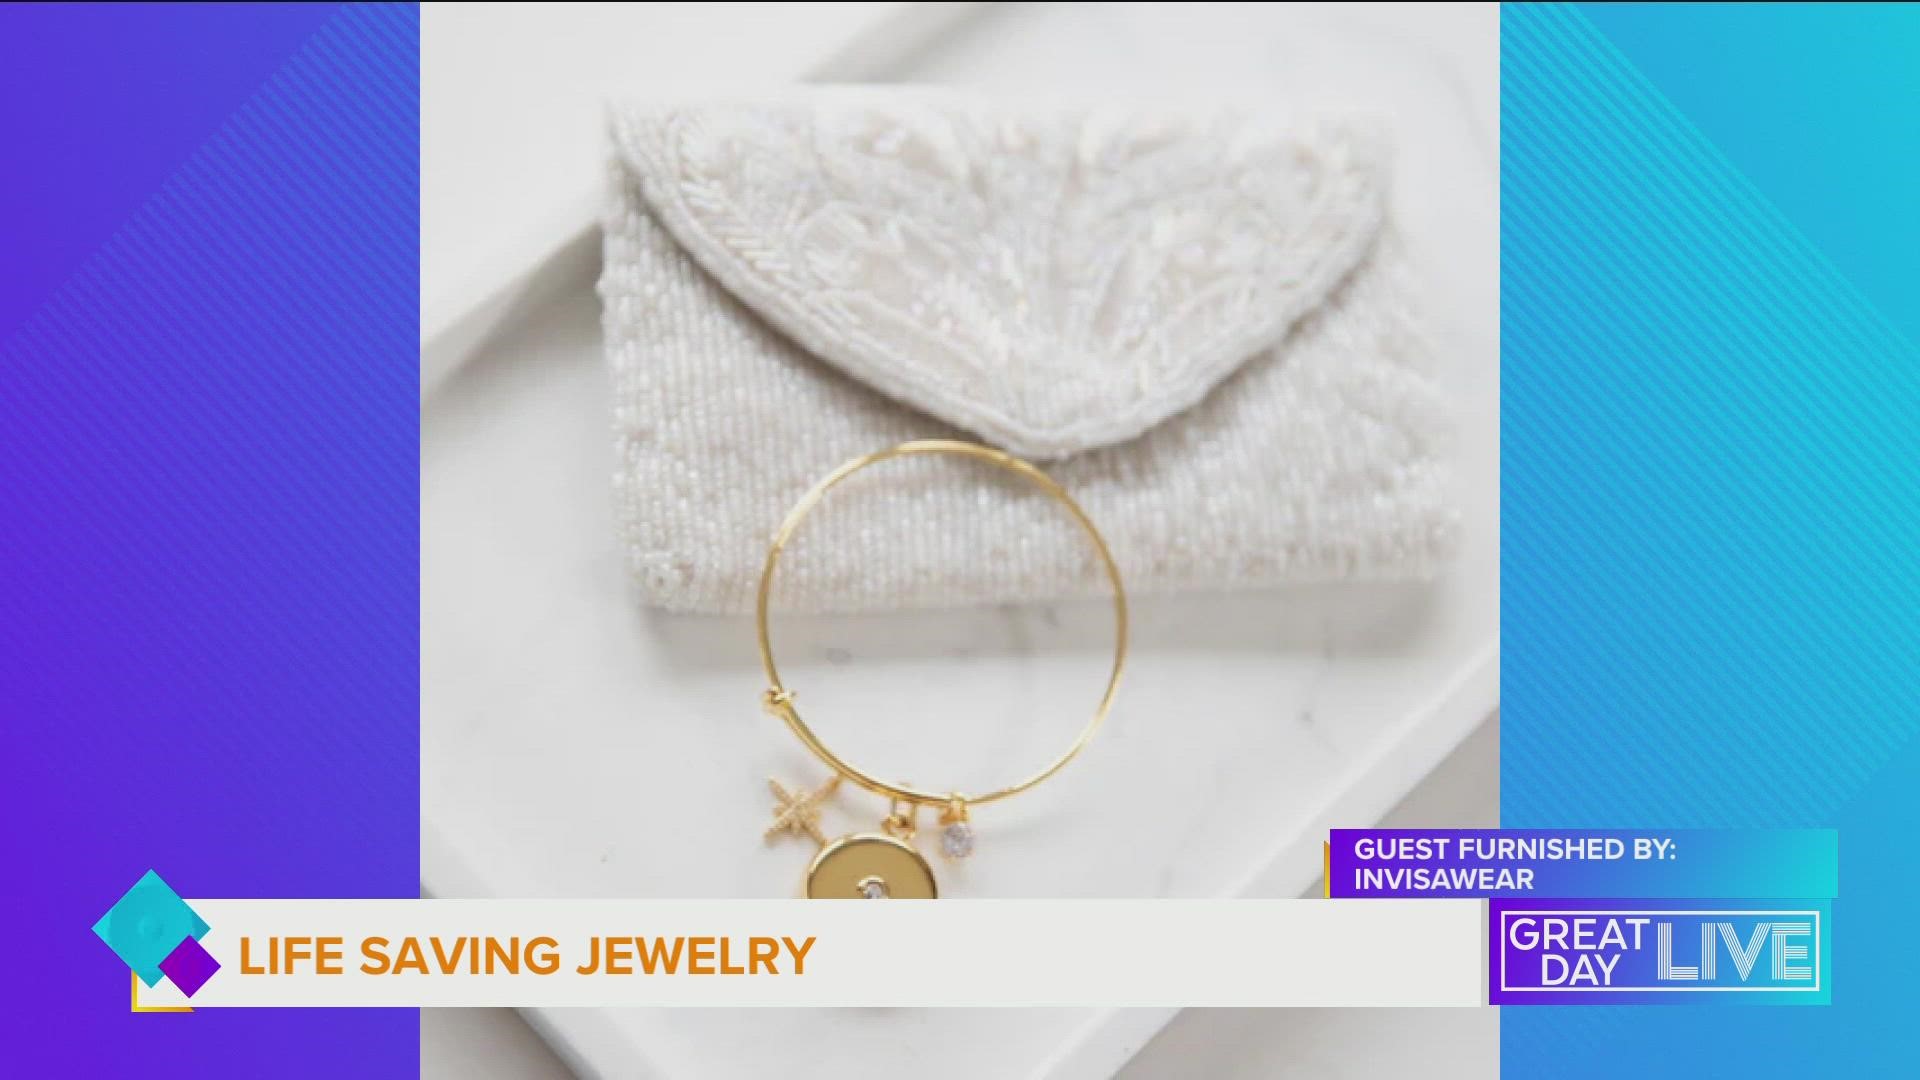 Jewelry that can save your life